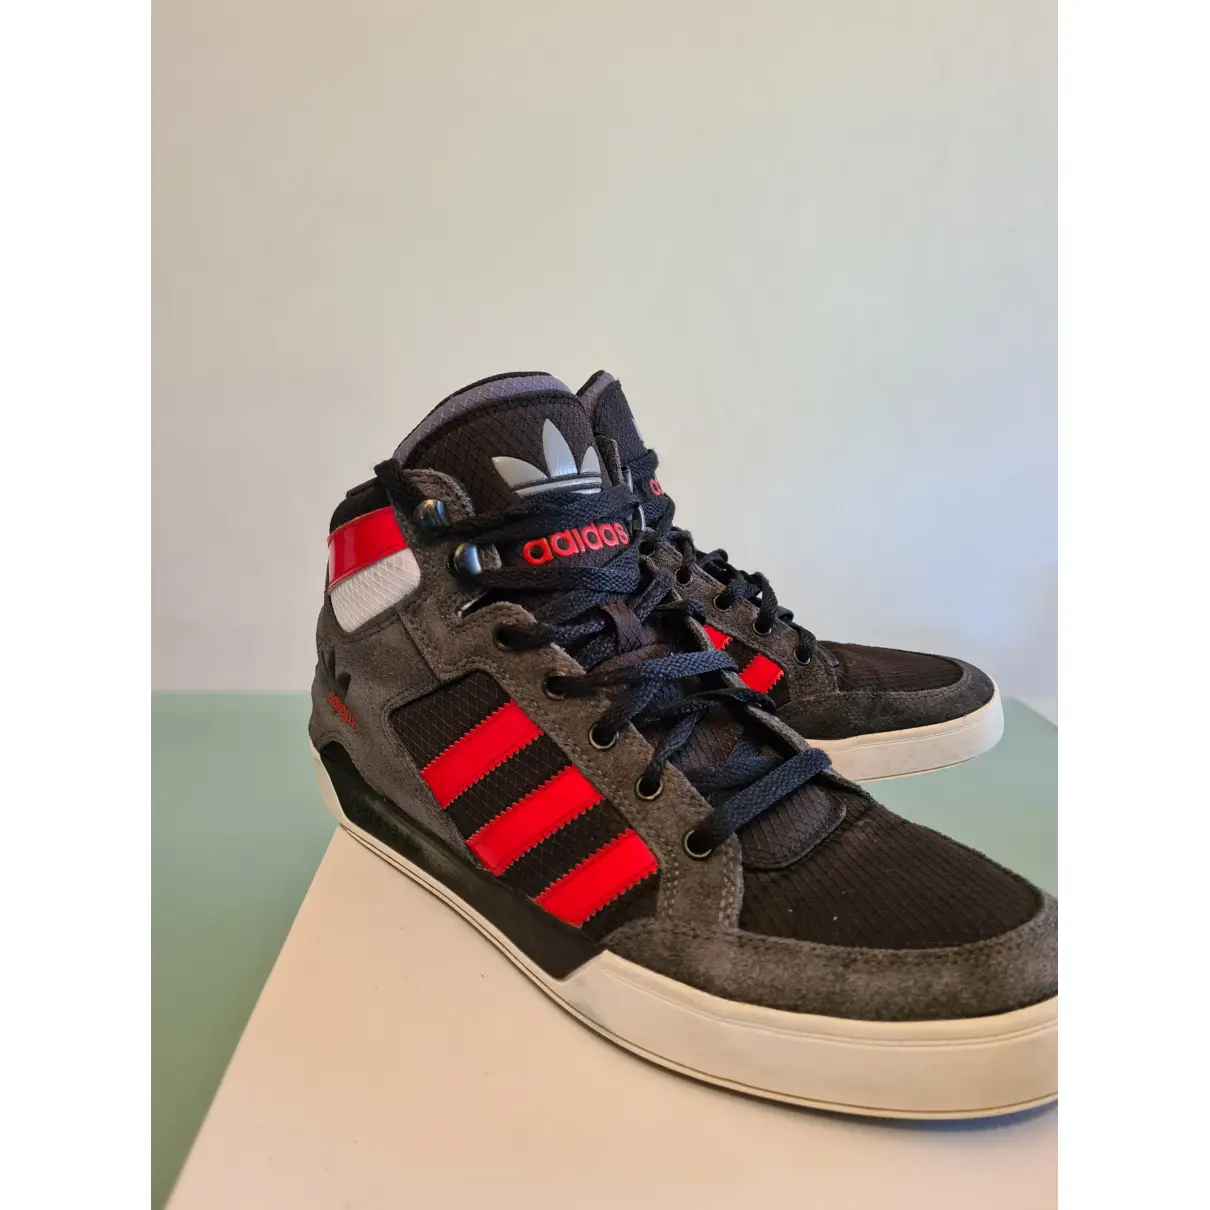 Buy Adidas High trainers online